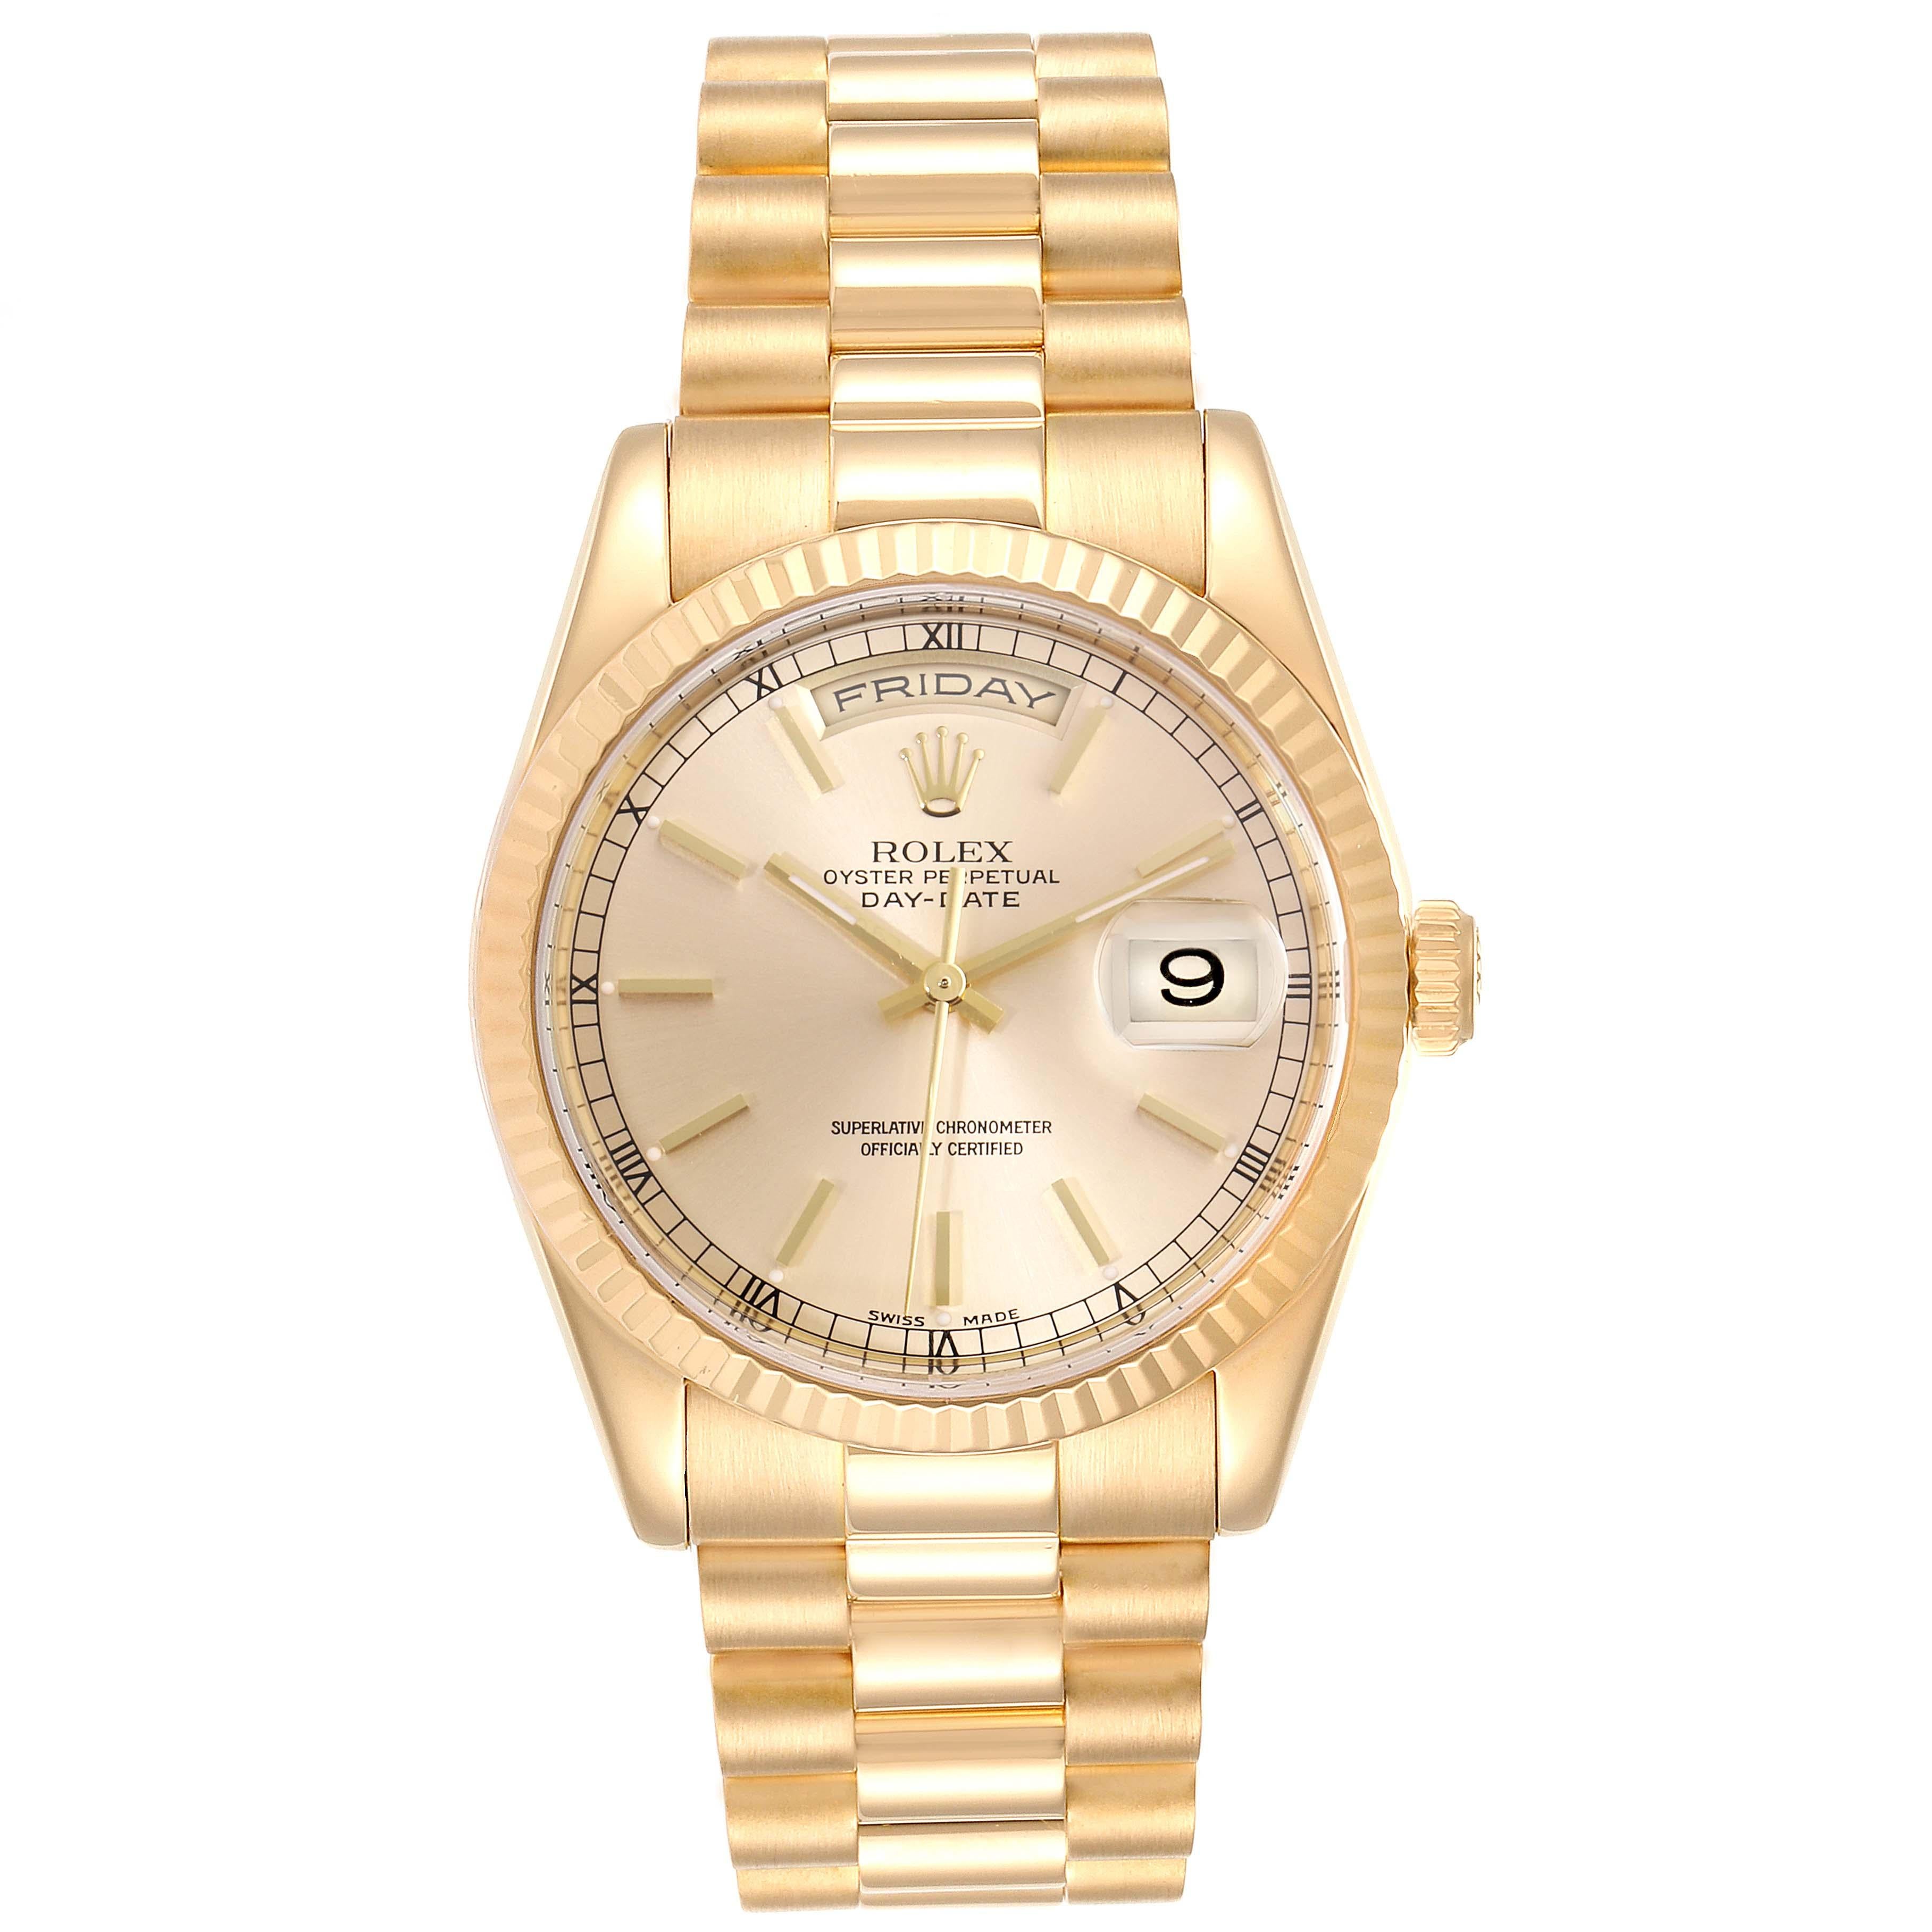 Rolex President Day Date 36mm Yellow Gold Mens Watch 118238 Box Papers. Officially certified chronometer self-winding movement. 18k yellow gold oyster case 36.0 mm in diameter. Rolex logo on a crown. 18K yellow gold fluted bezel. Scratch resistant